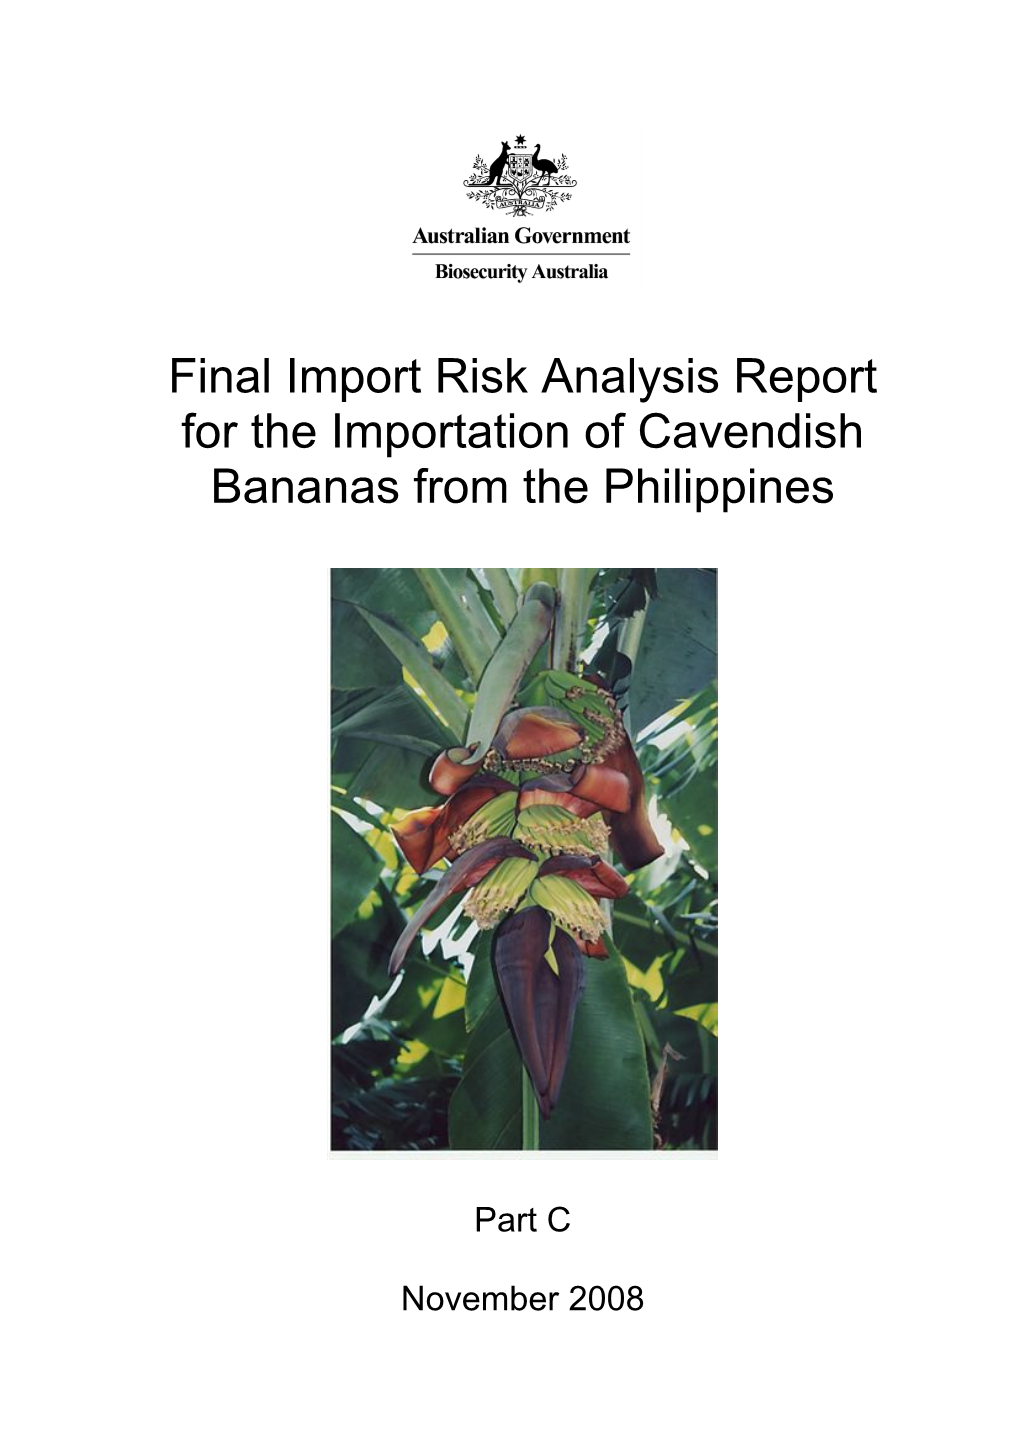 (IRA) for the Importation of Cavendish Bananas from the Philippines